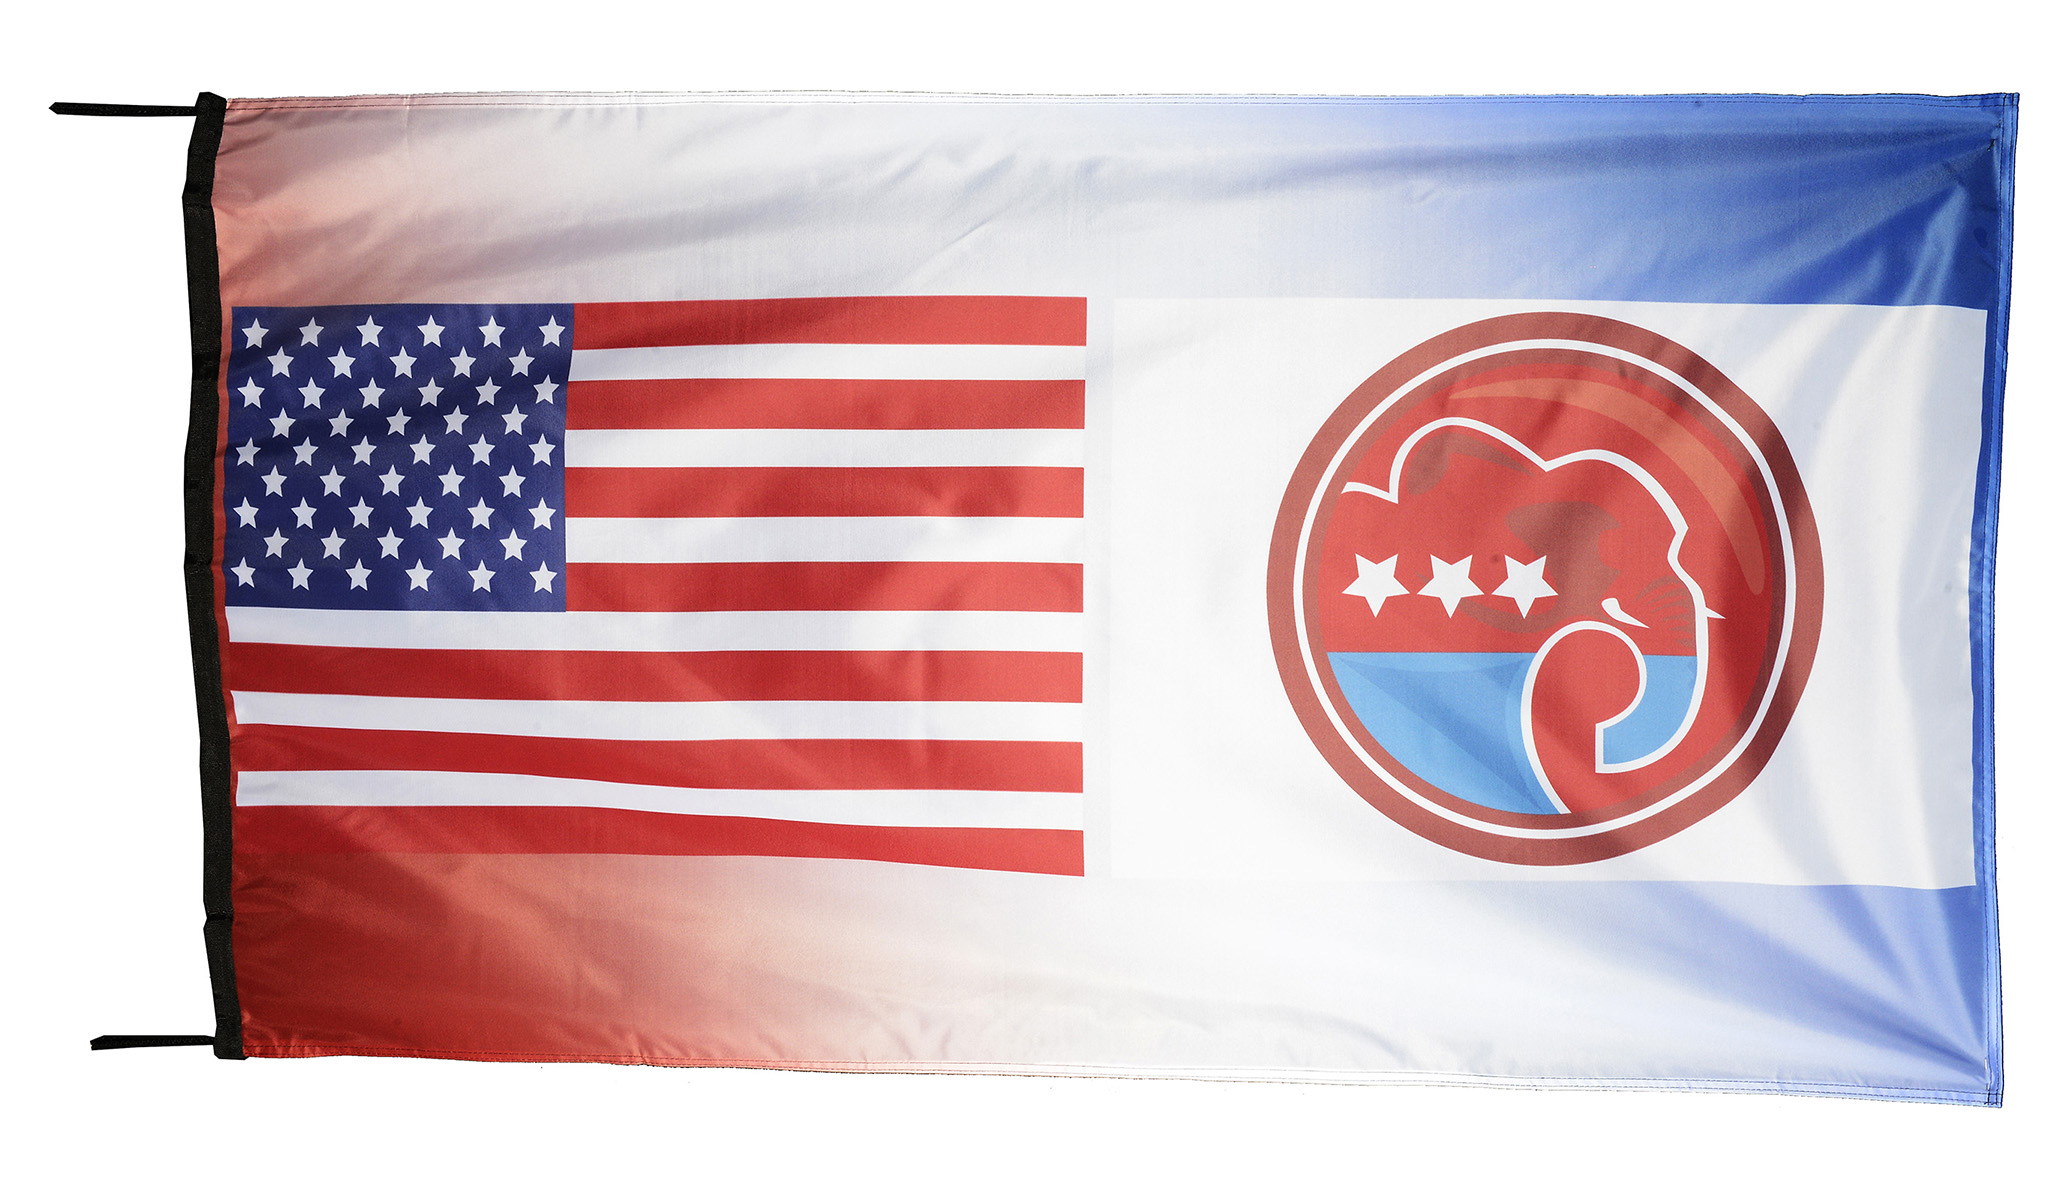 Flag  078 USA / US Country / United States Of America and Republicans Party / Senators / Congress / Washington / White House / Capitol / Politics / Presidential / Elections / Washington / Pride Hybrid Weather-Resistant Polyester Outdoor Flag Landscape Banner / Vivid Colors / 3 X 5 FT (150 x 90cm) International Flags for Sale